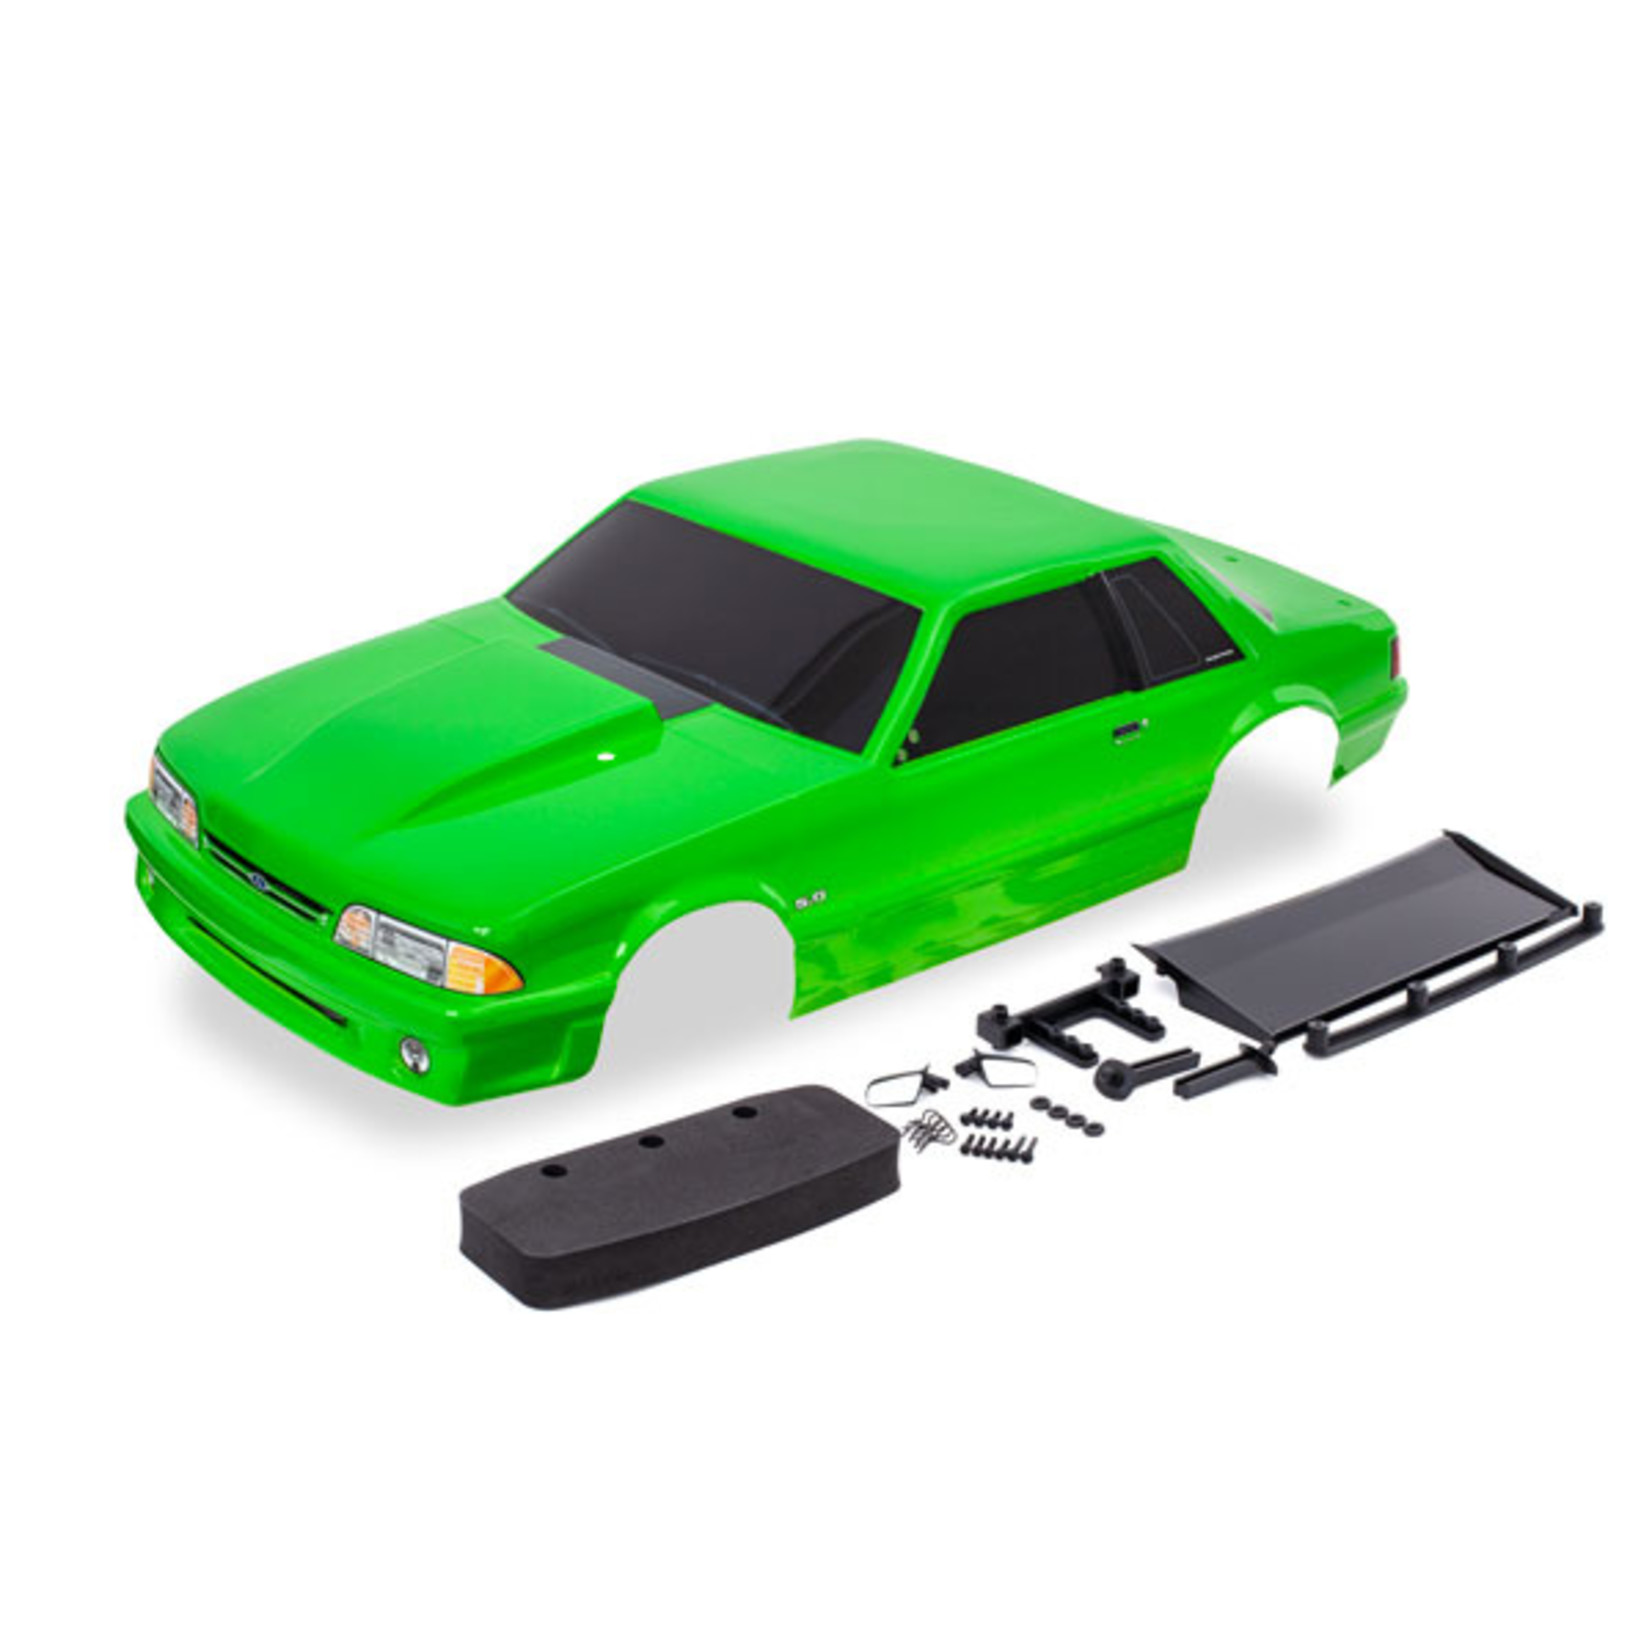 Traxxas 9421G - Body, Ford Mustang, Fox Body, green (painted, decals applied) (includes side mirrors, wing, wing retainer, rear body mount posts, foam body bumper, & mounting hardware)